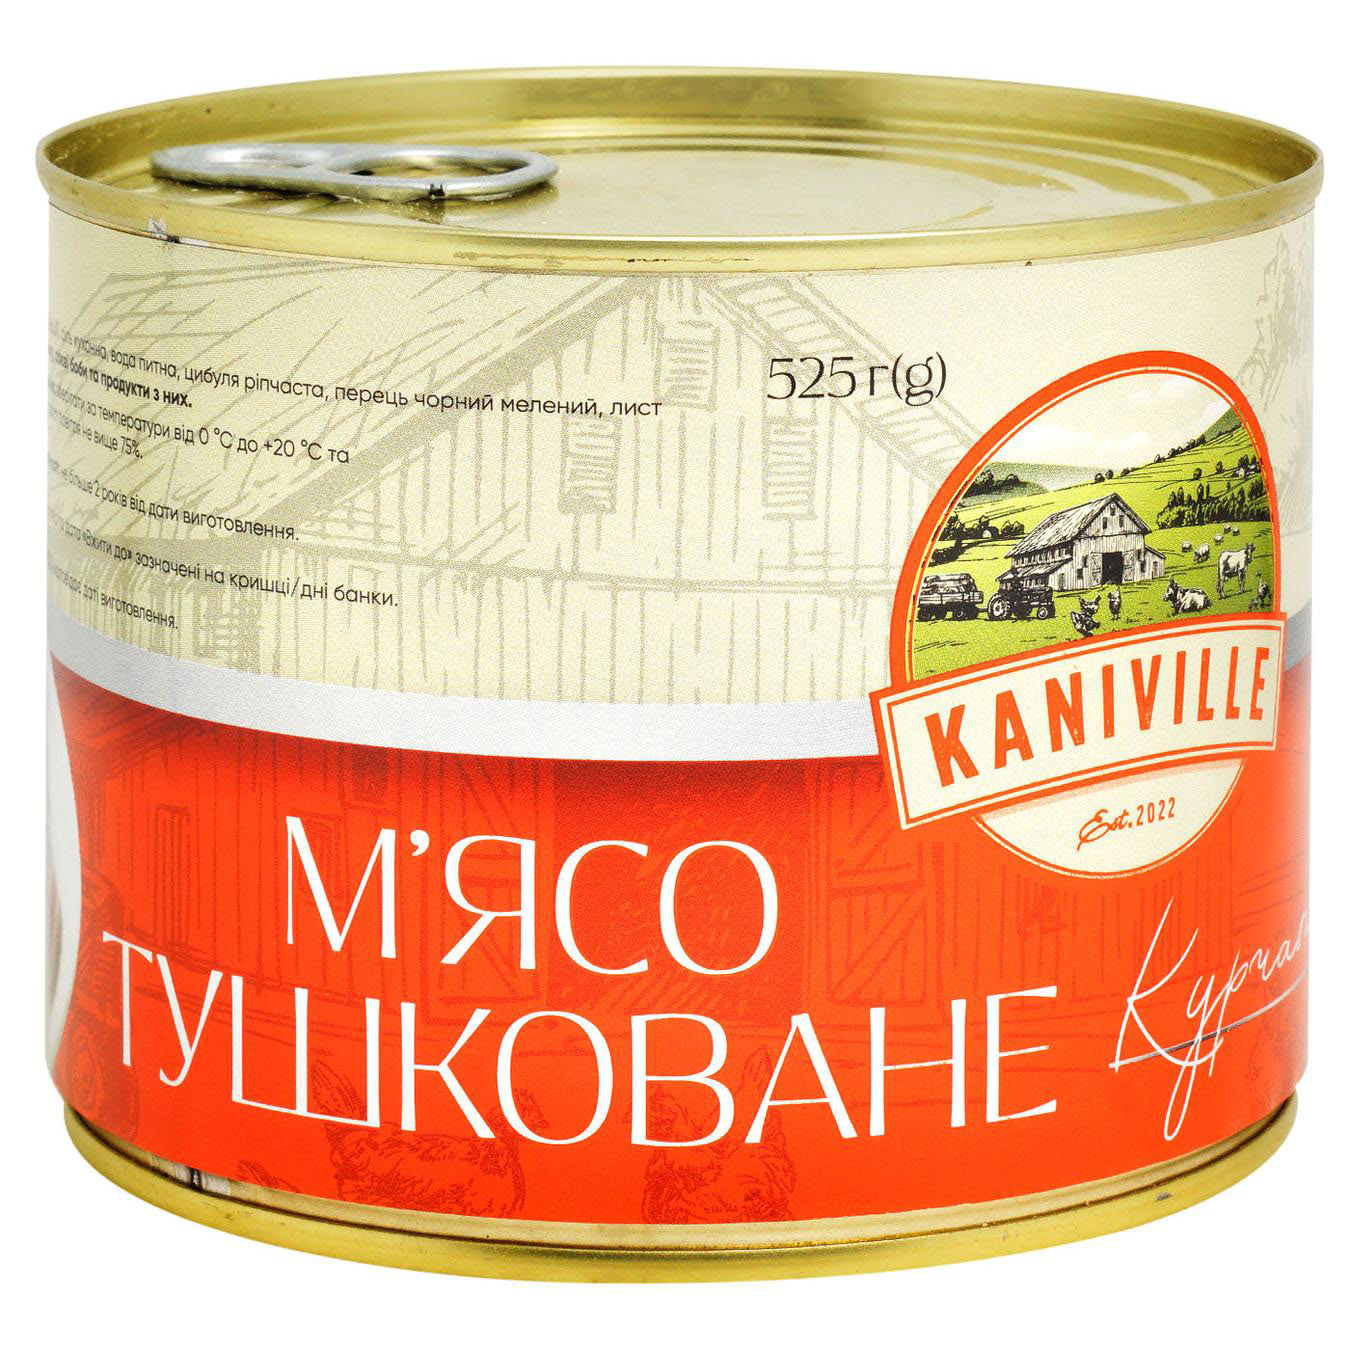 Kaniville stewed chicken meat 525g iron can with a key